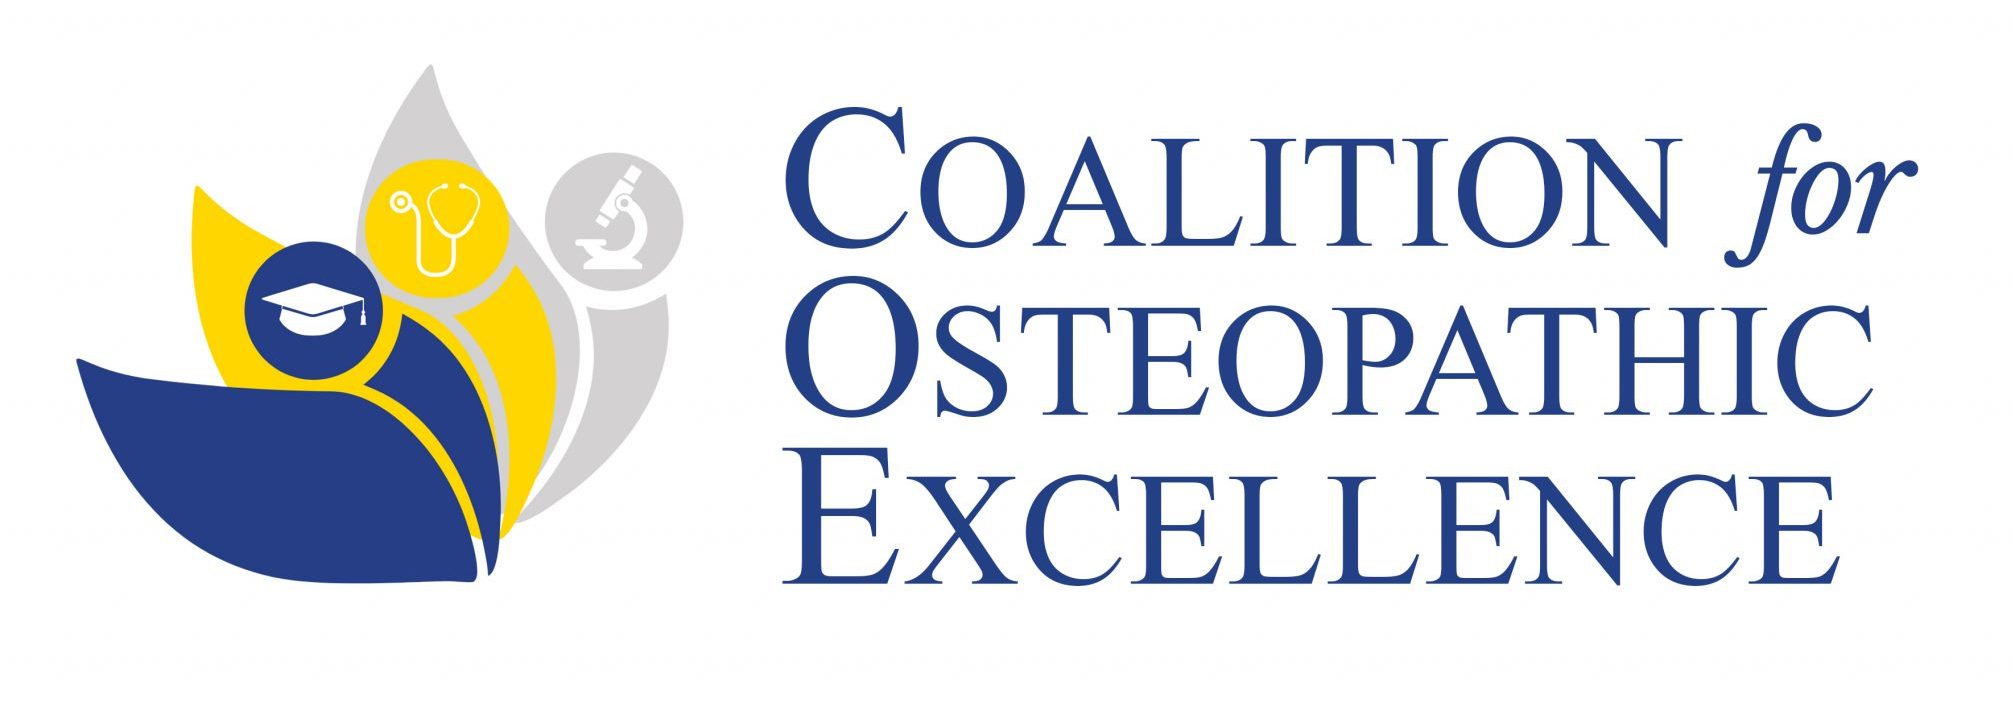 The Coalition for Osteopathic Excellence (COE)